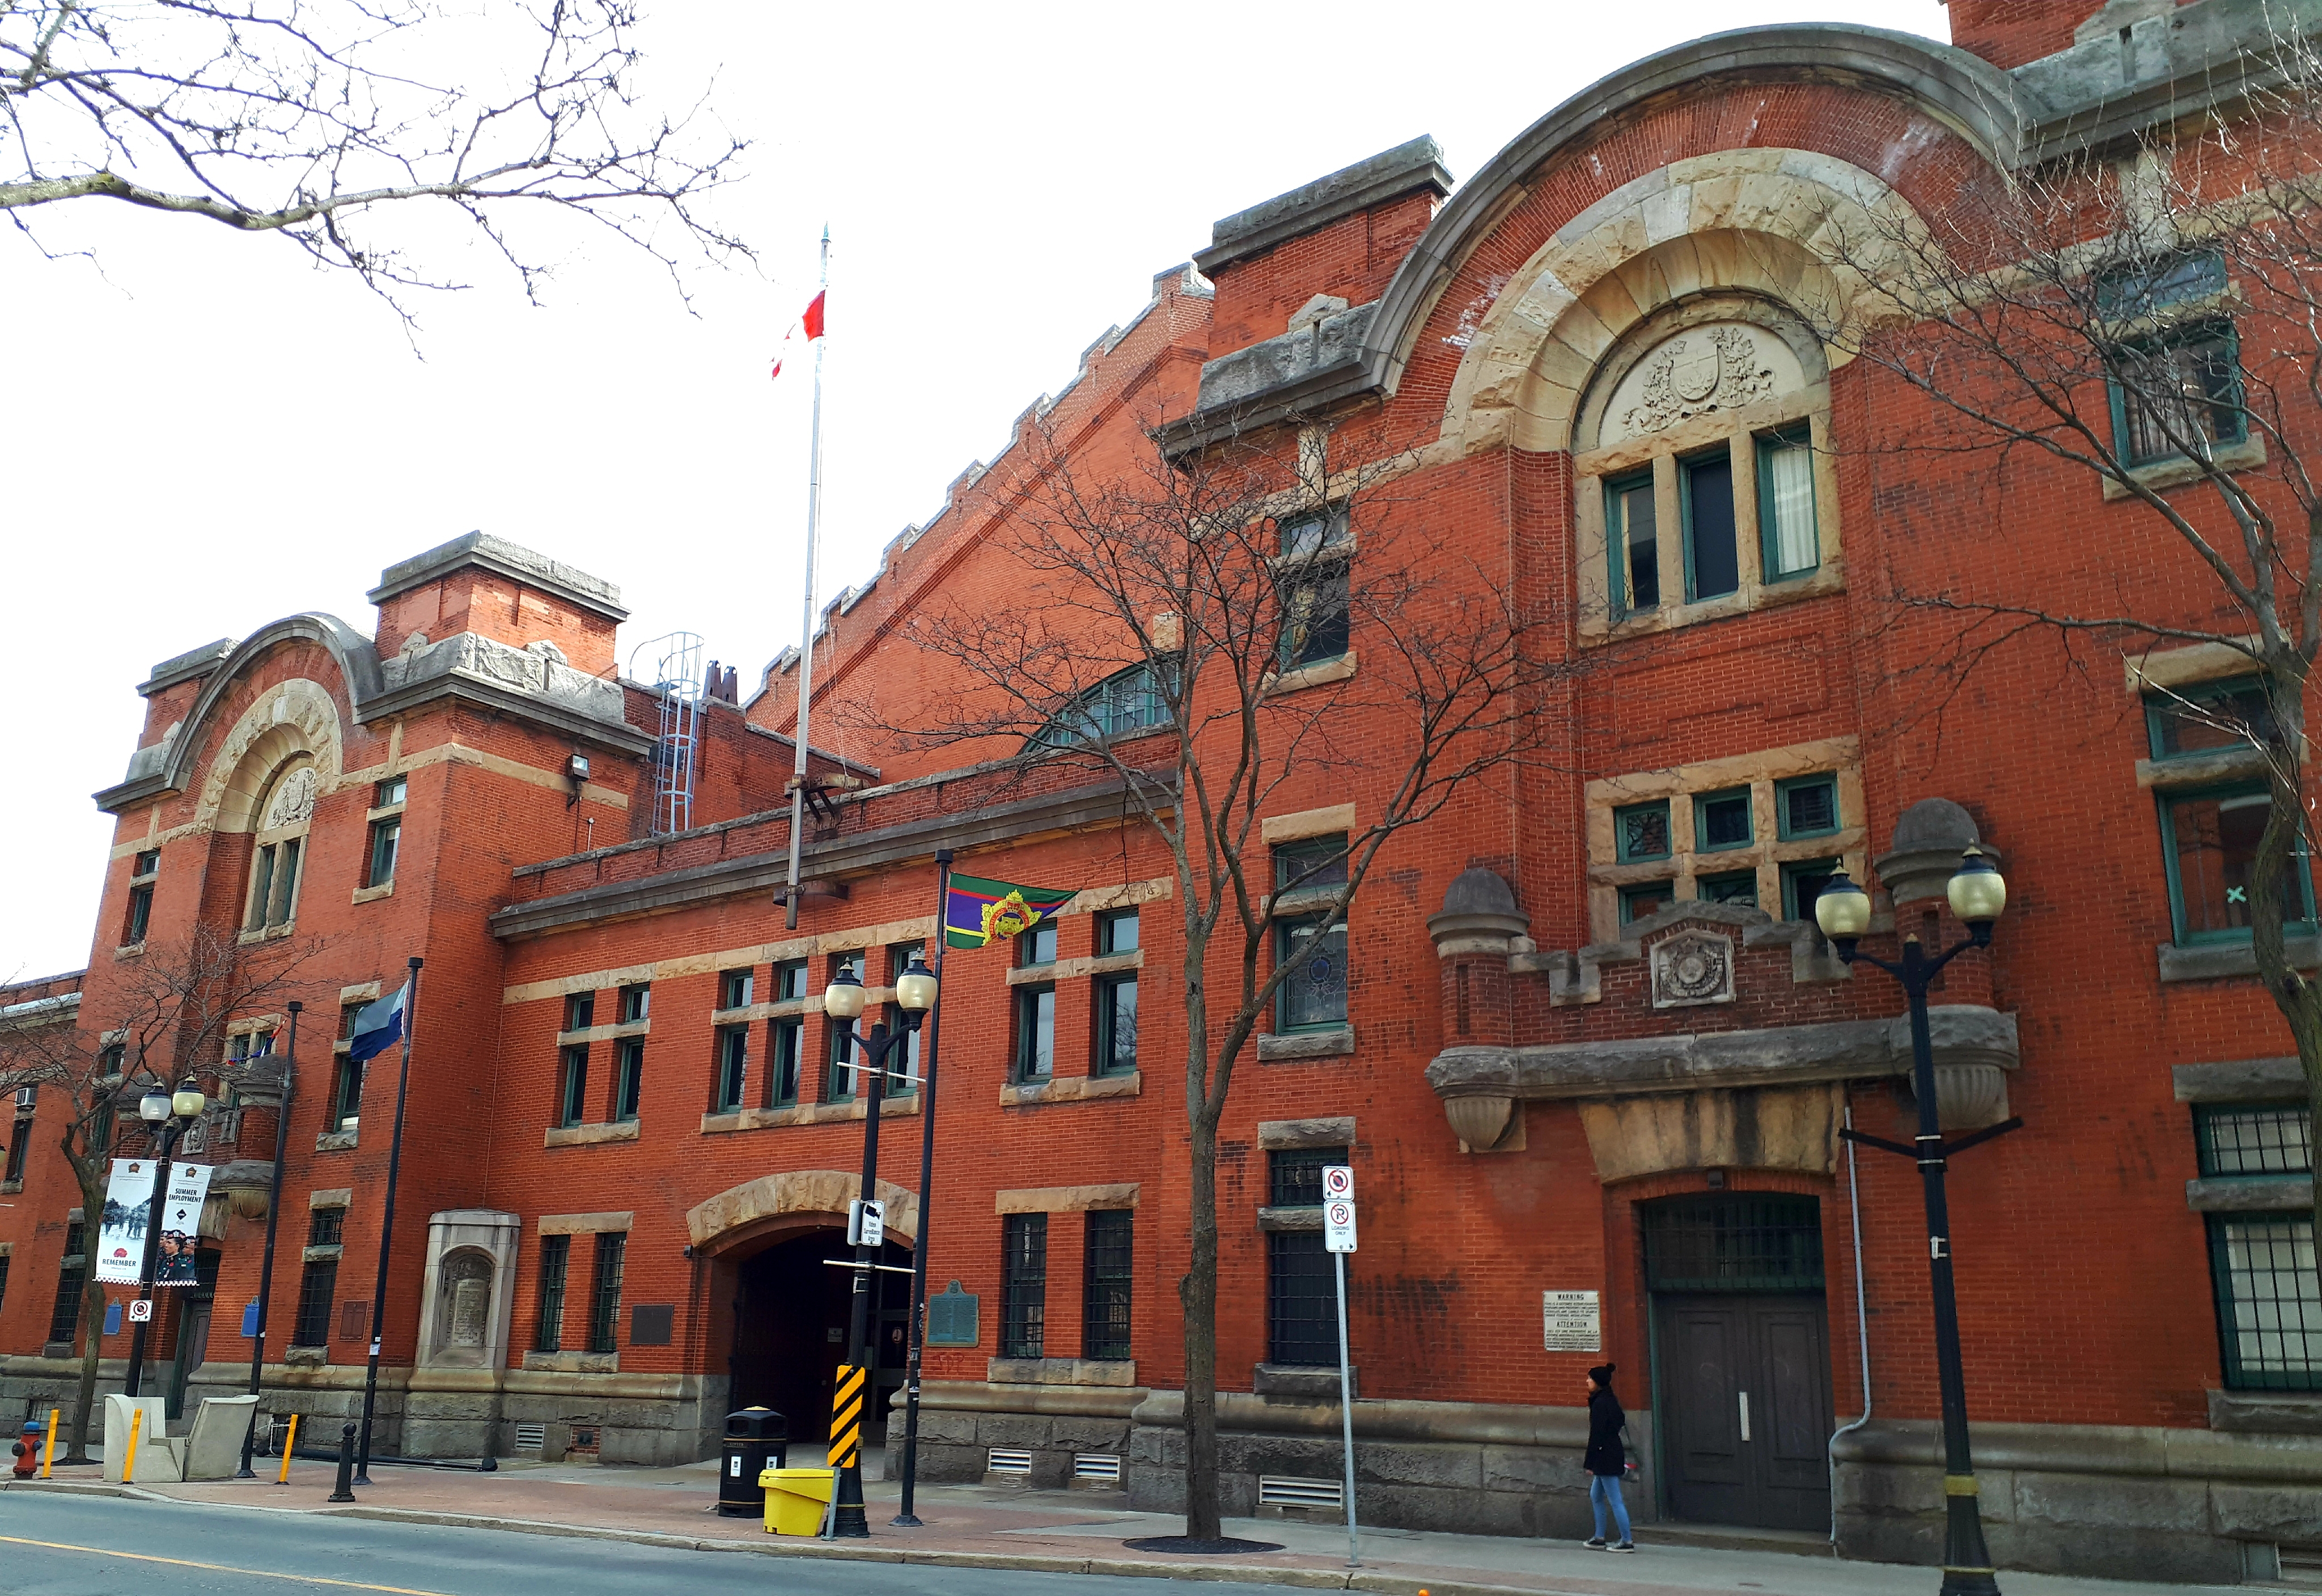 The John Weir Foote Armoury National Historic Site, in Hamilton, Ontario, seen from James St. North. The Armoury is an imposing red brick building, with decorative arch and stone details.